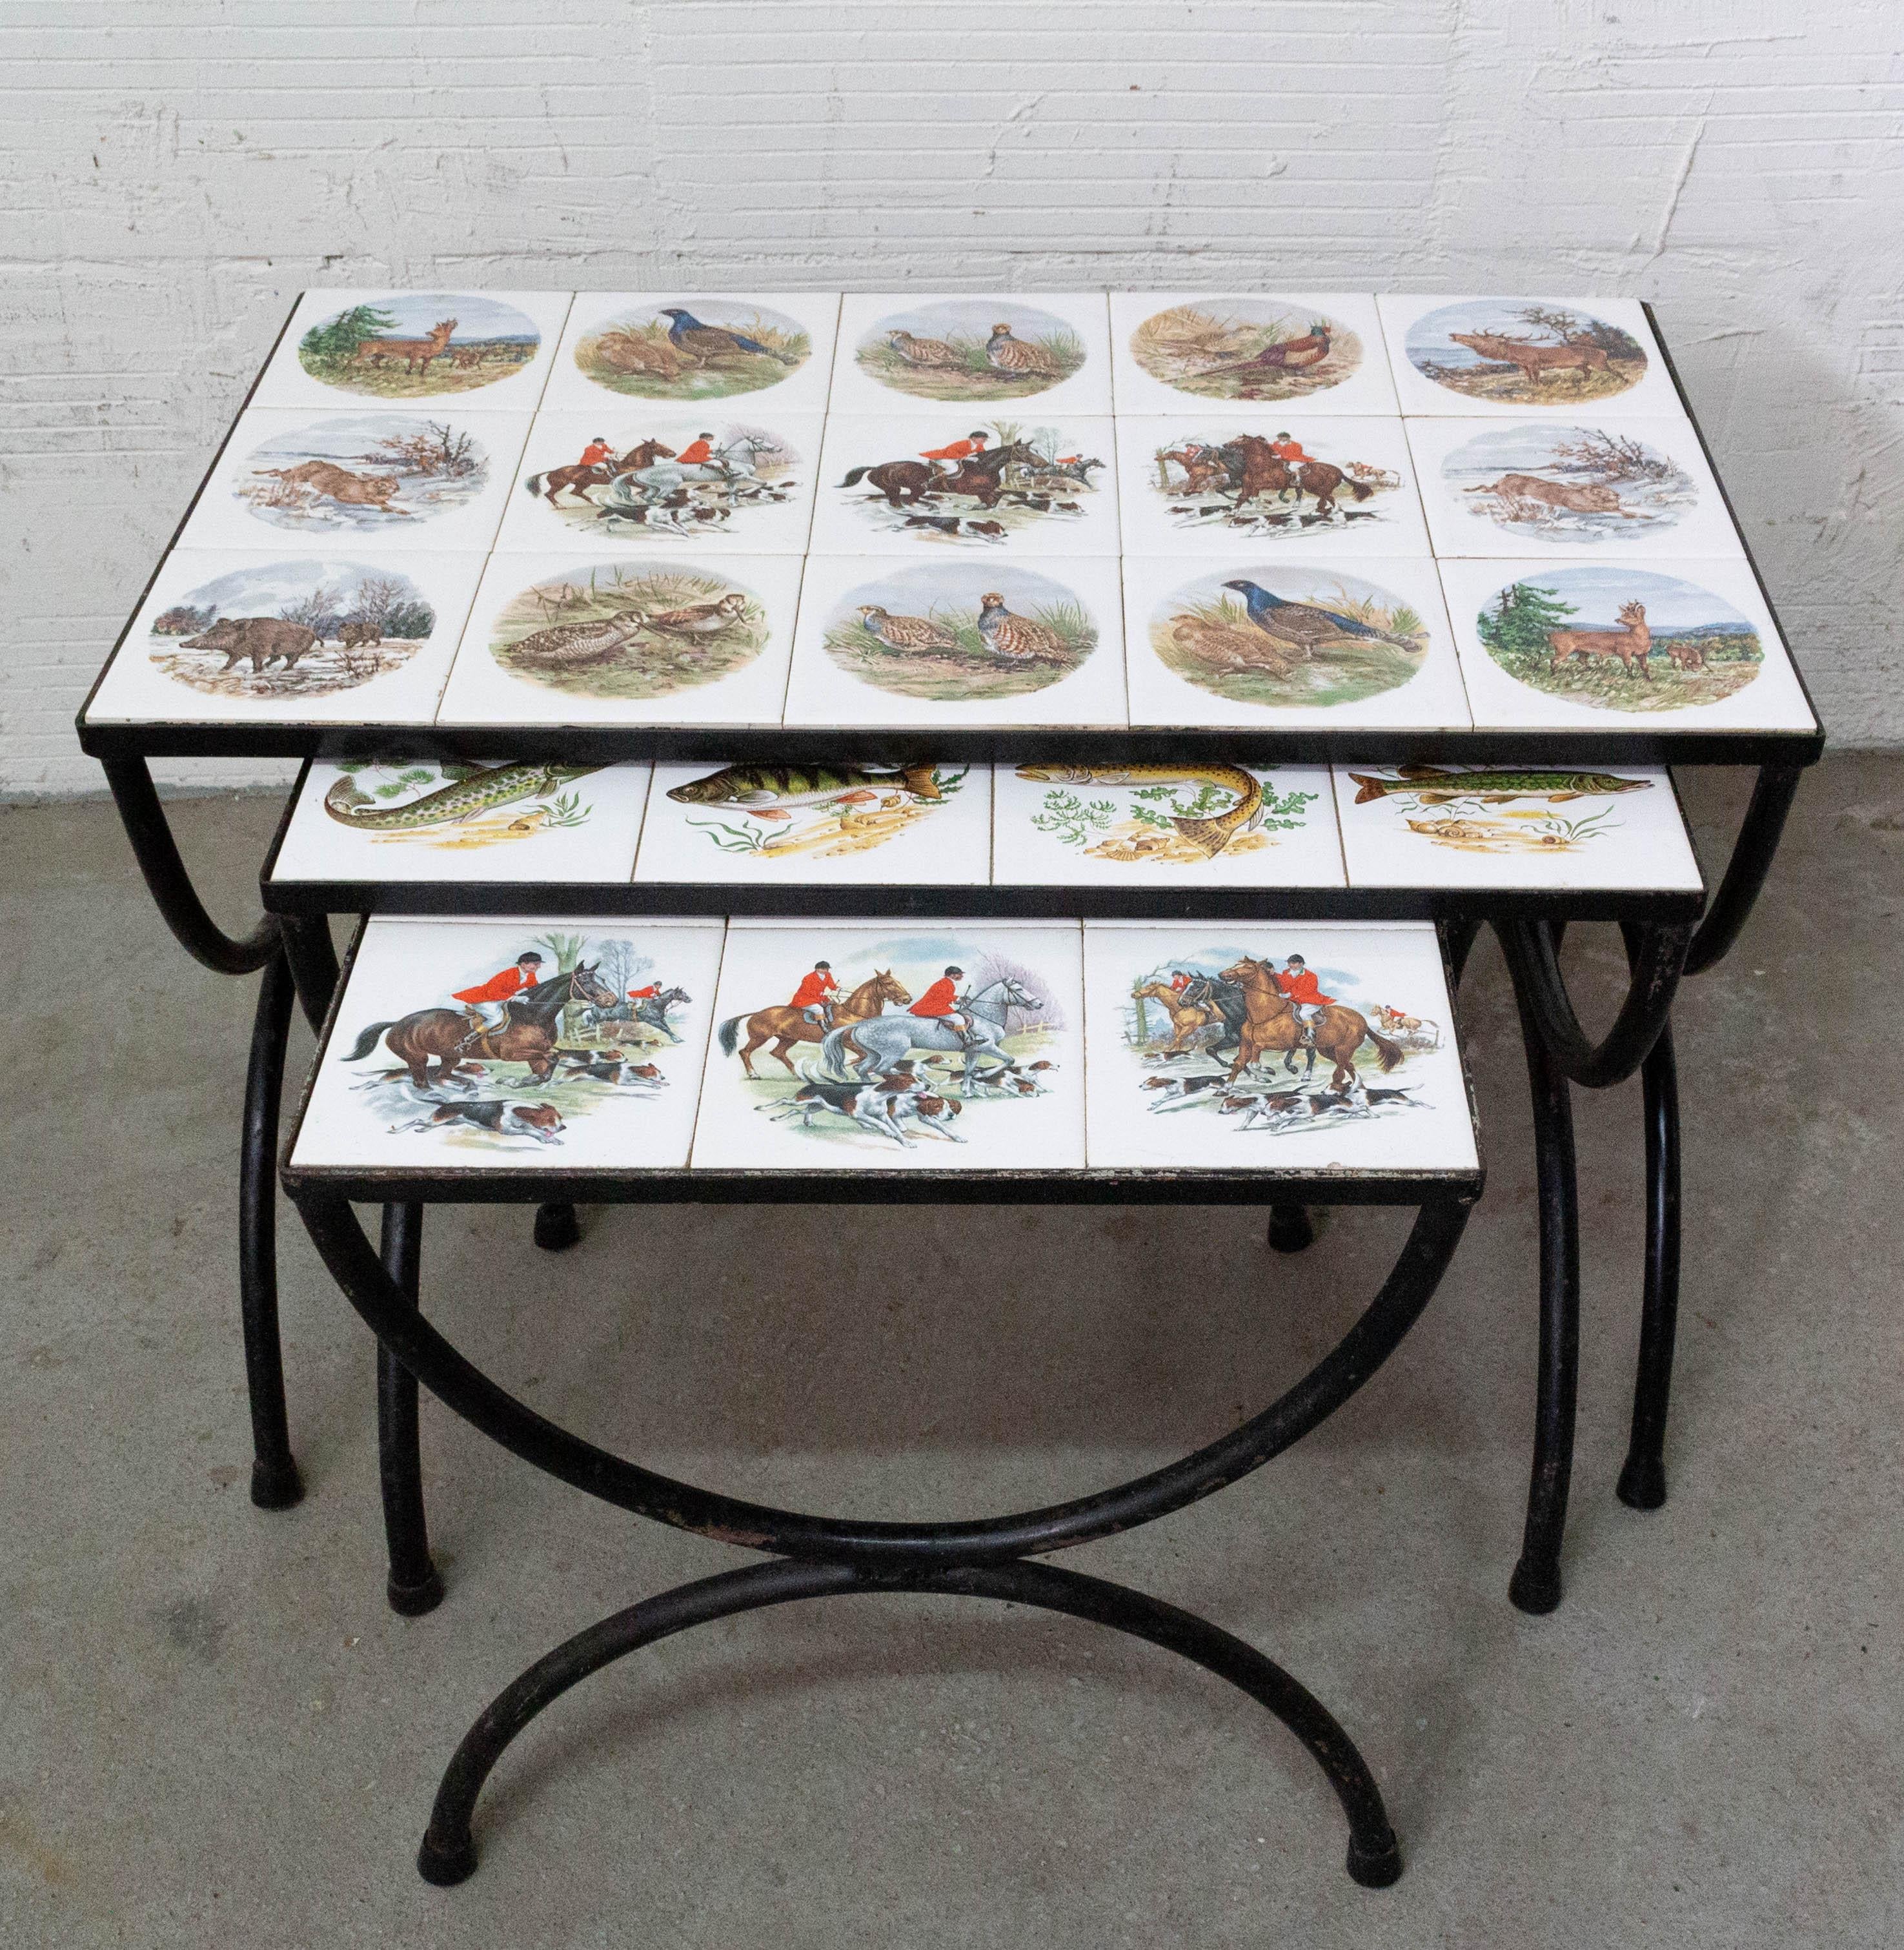 Three nesting vintage tables hunting sceneries and fishes, French, circa 1960
The biggest one is representing game, the two little tables are nesting tables representing fish and hunting parties.
They can be used as coffee and end